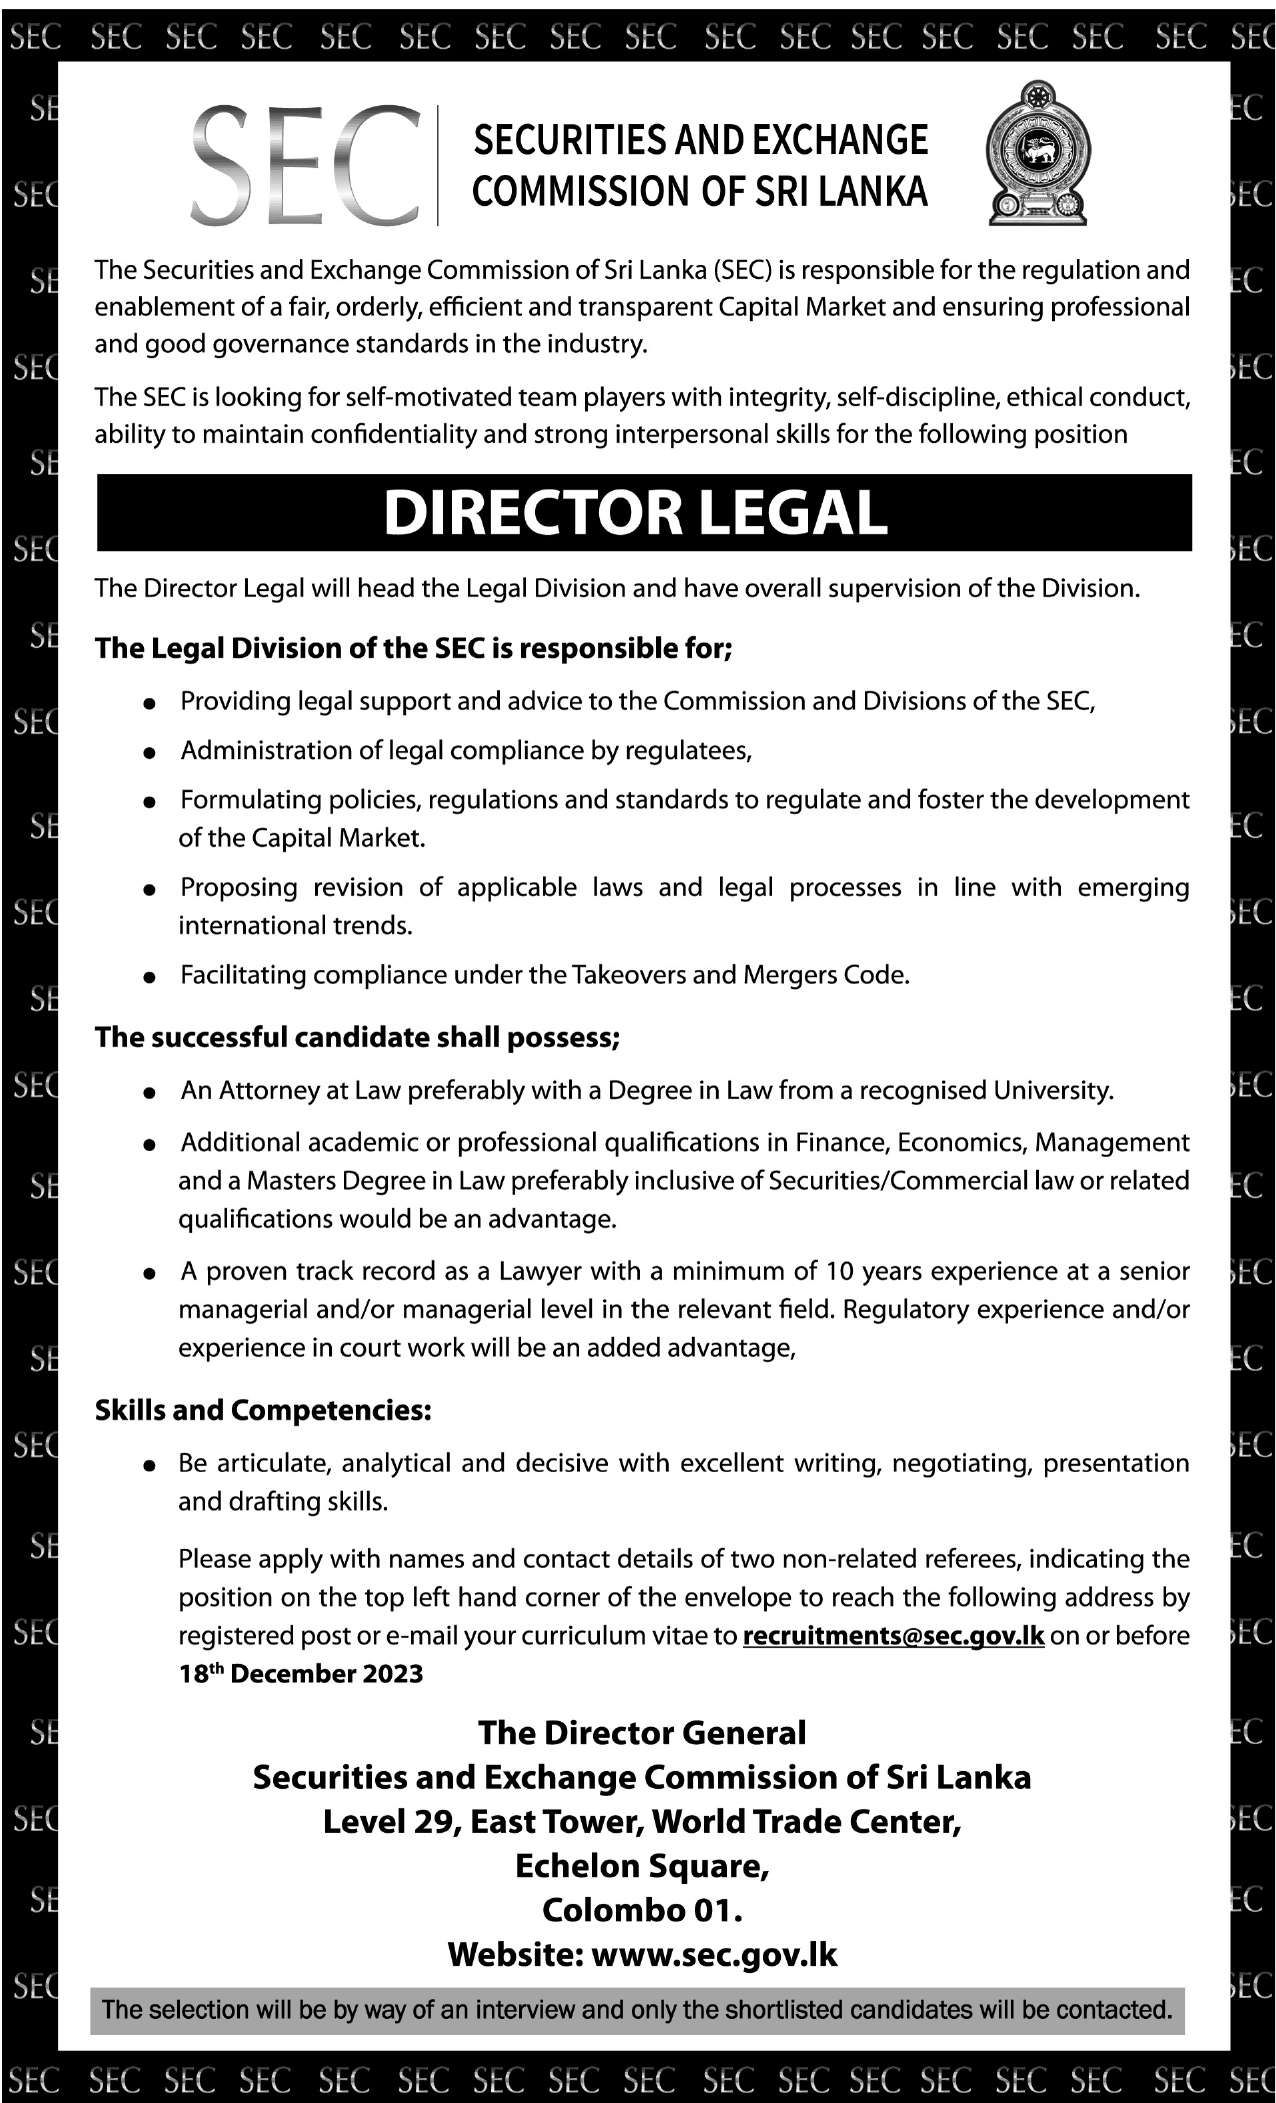 Director Legal - Securities and exchange commission of Sri Lanka